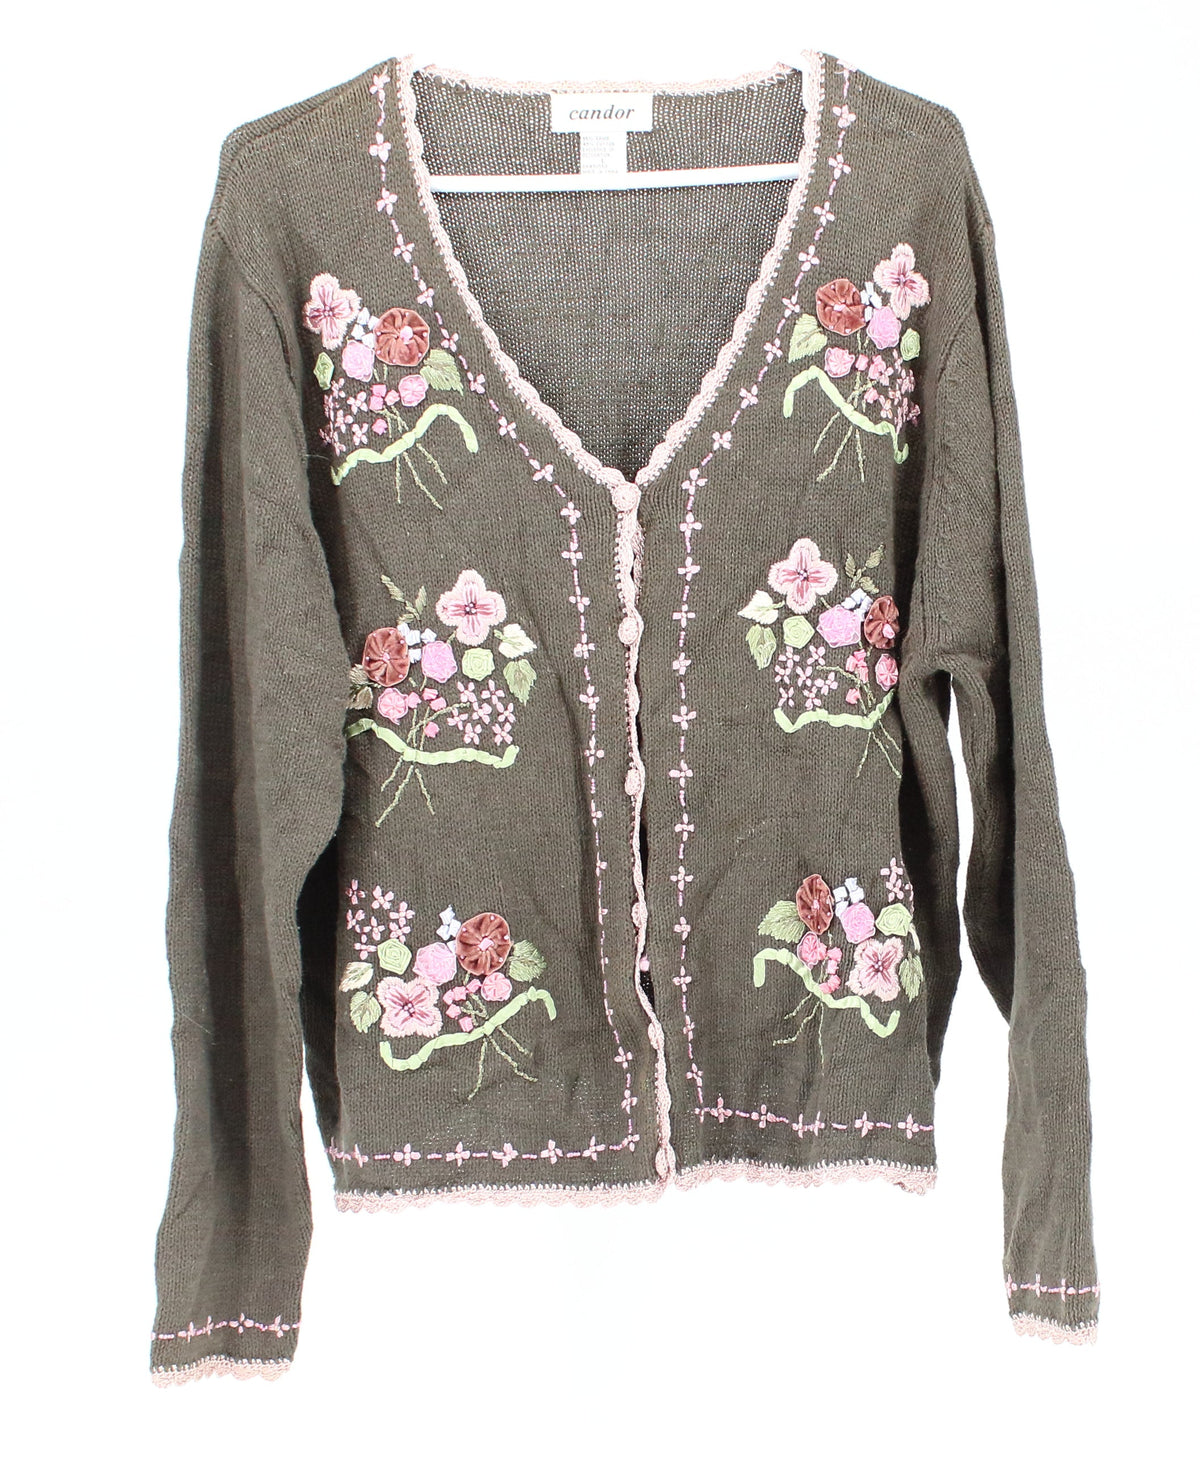 Candor Green Embroidered Cardigan Sweater